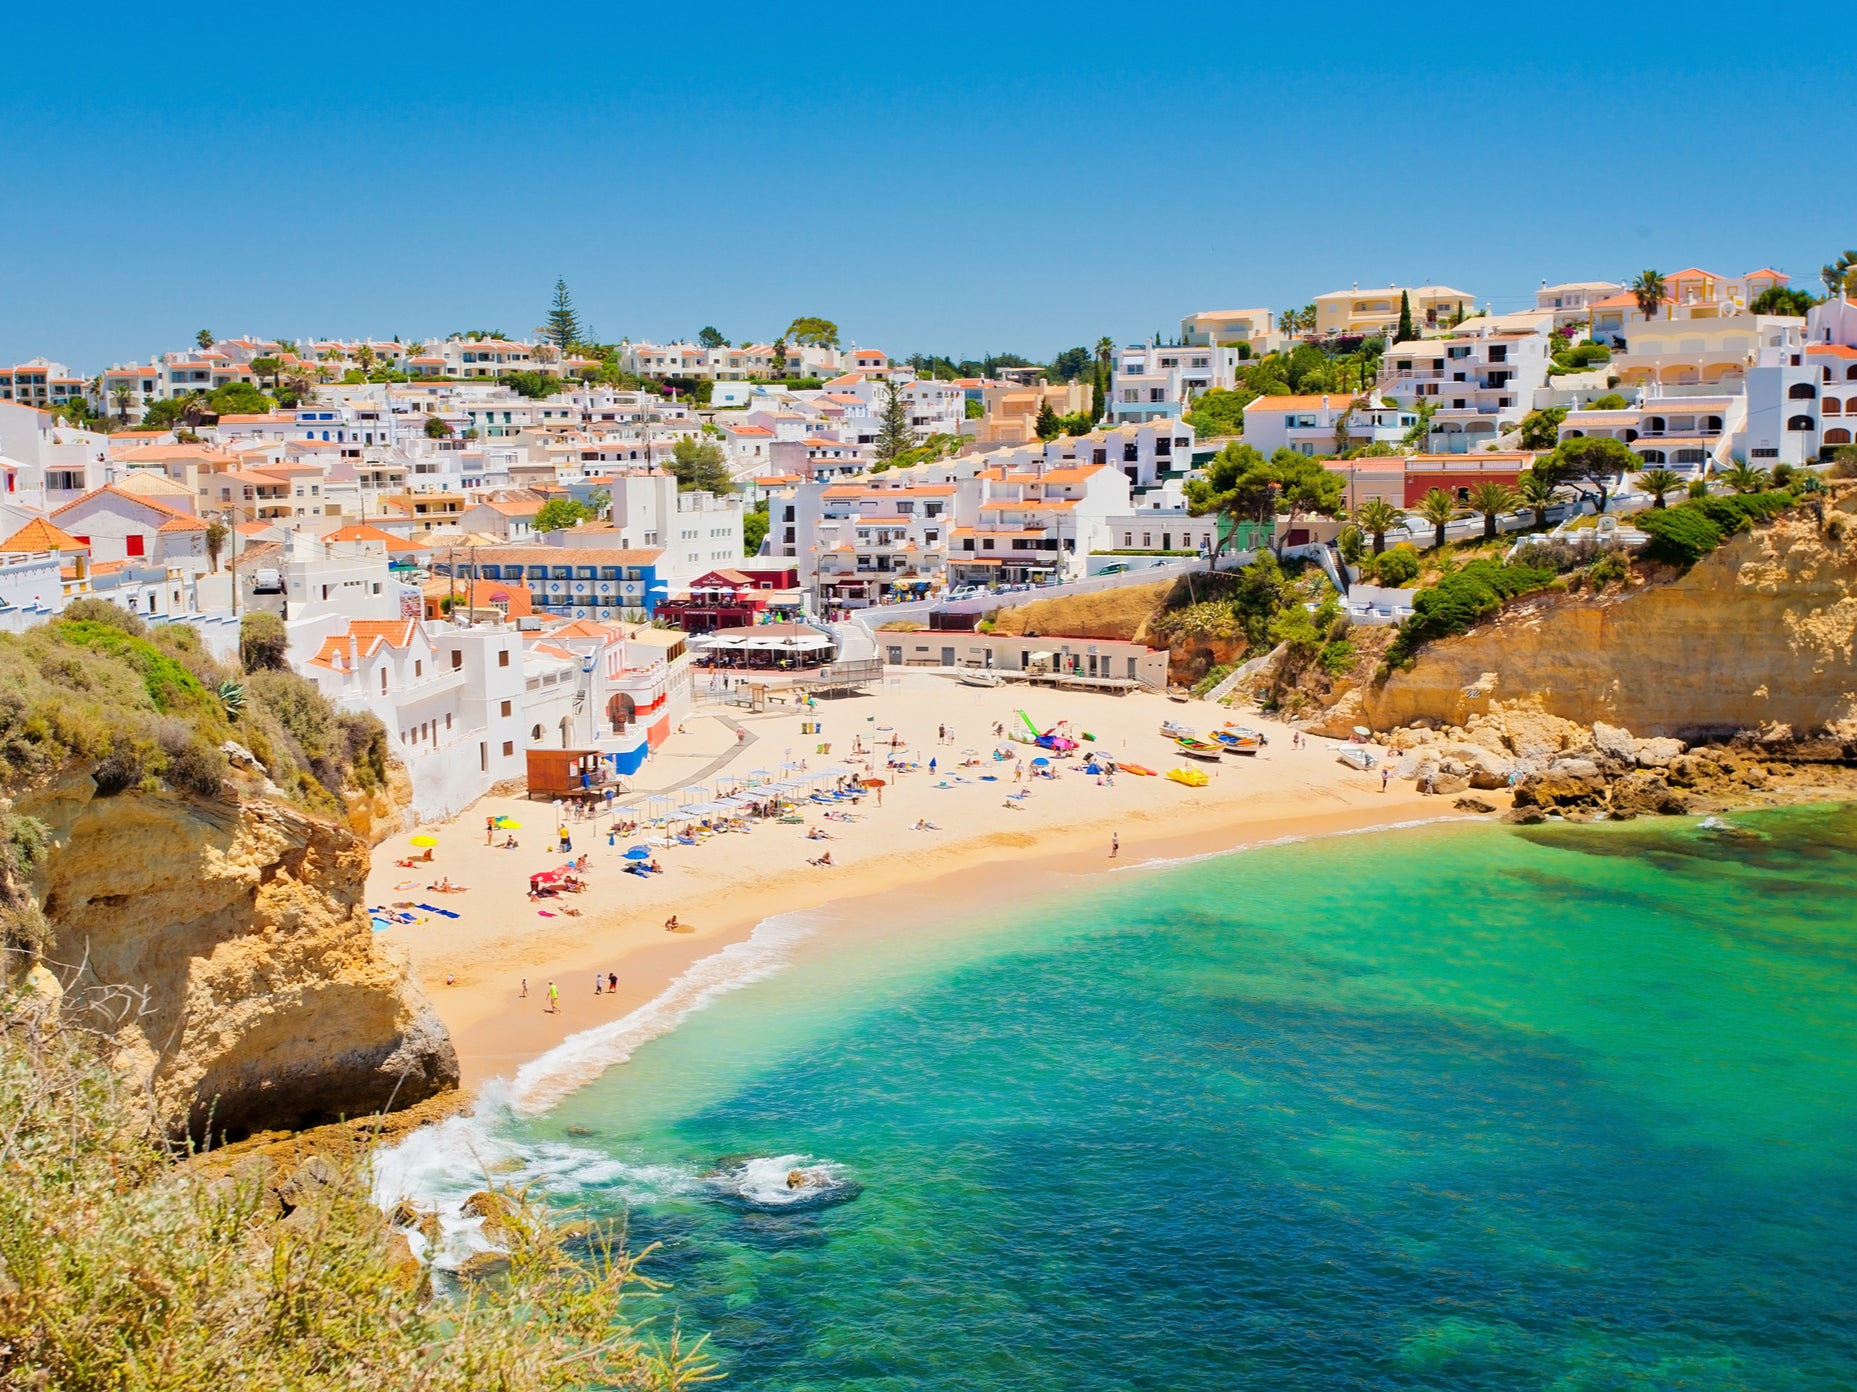 This resort town is close to Marinha and Vale Covo beaches